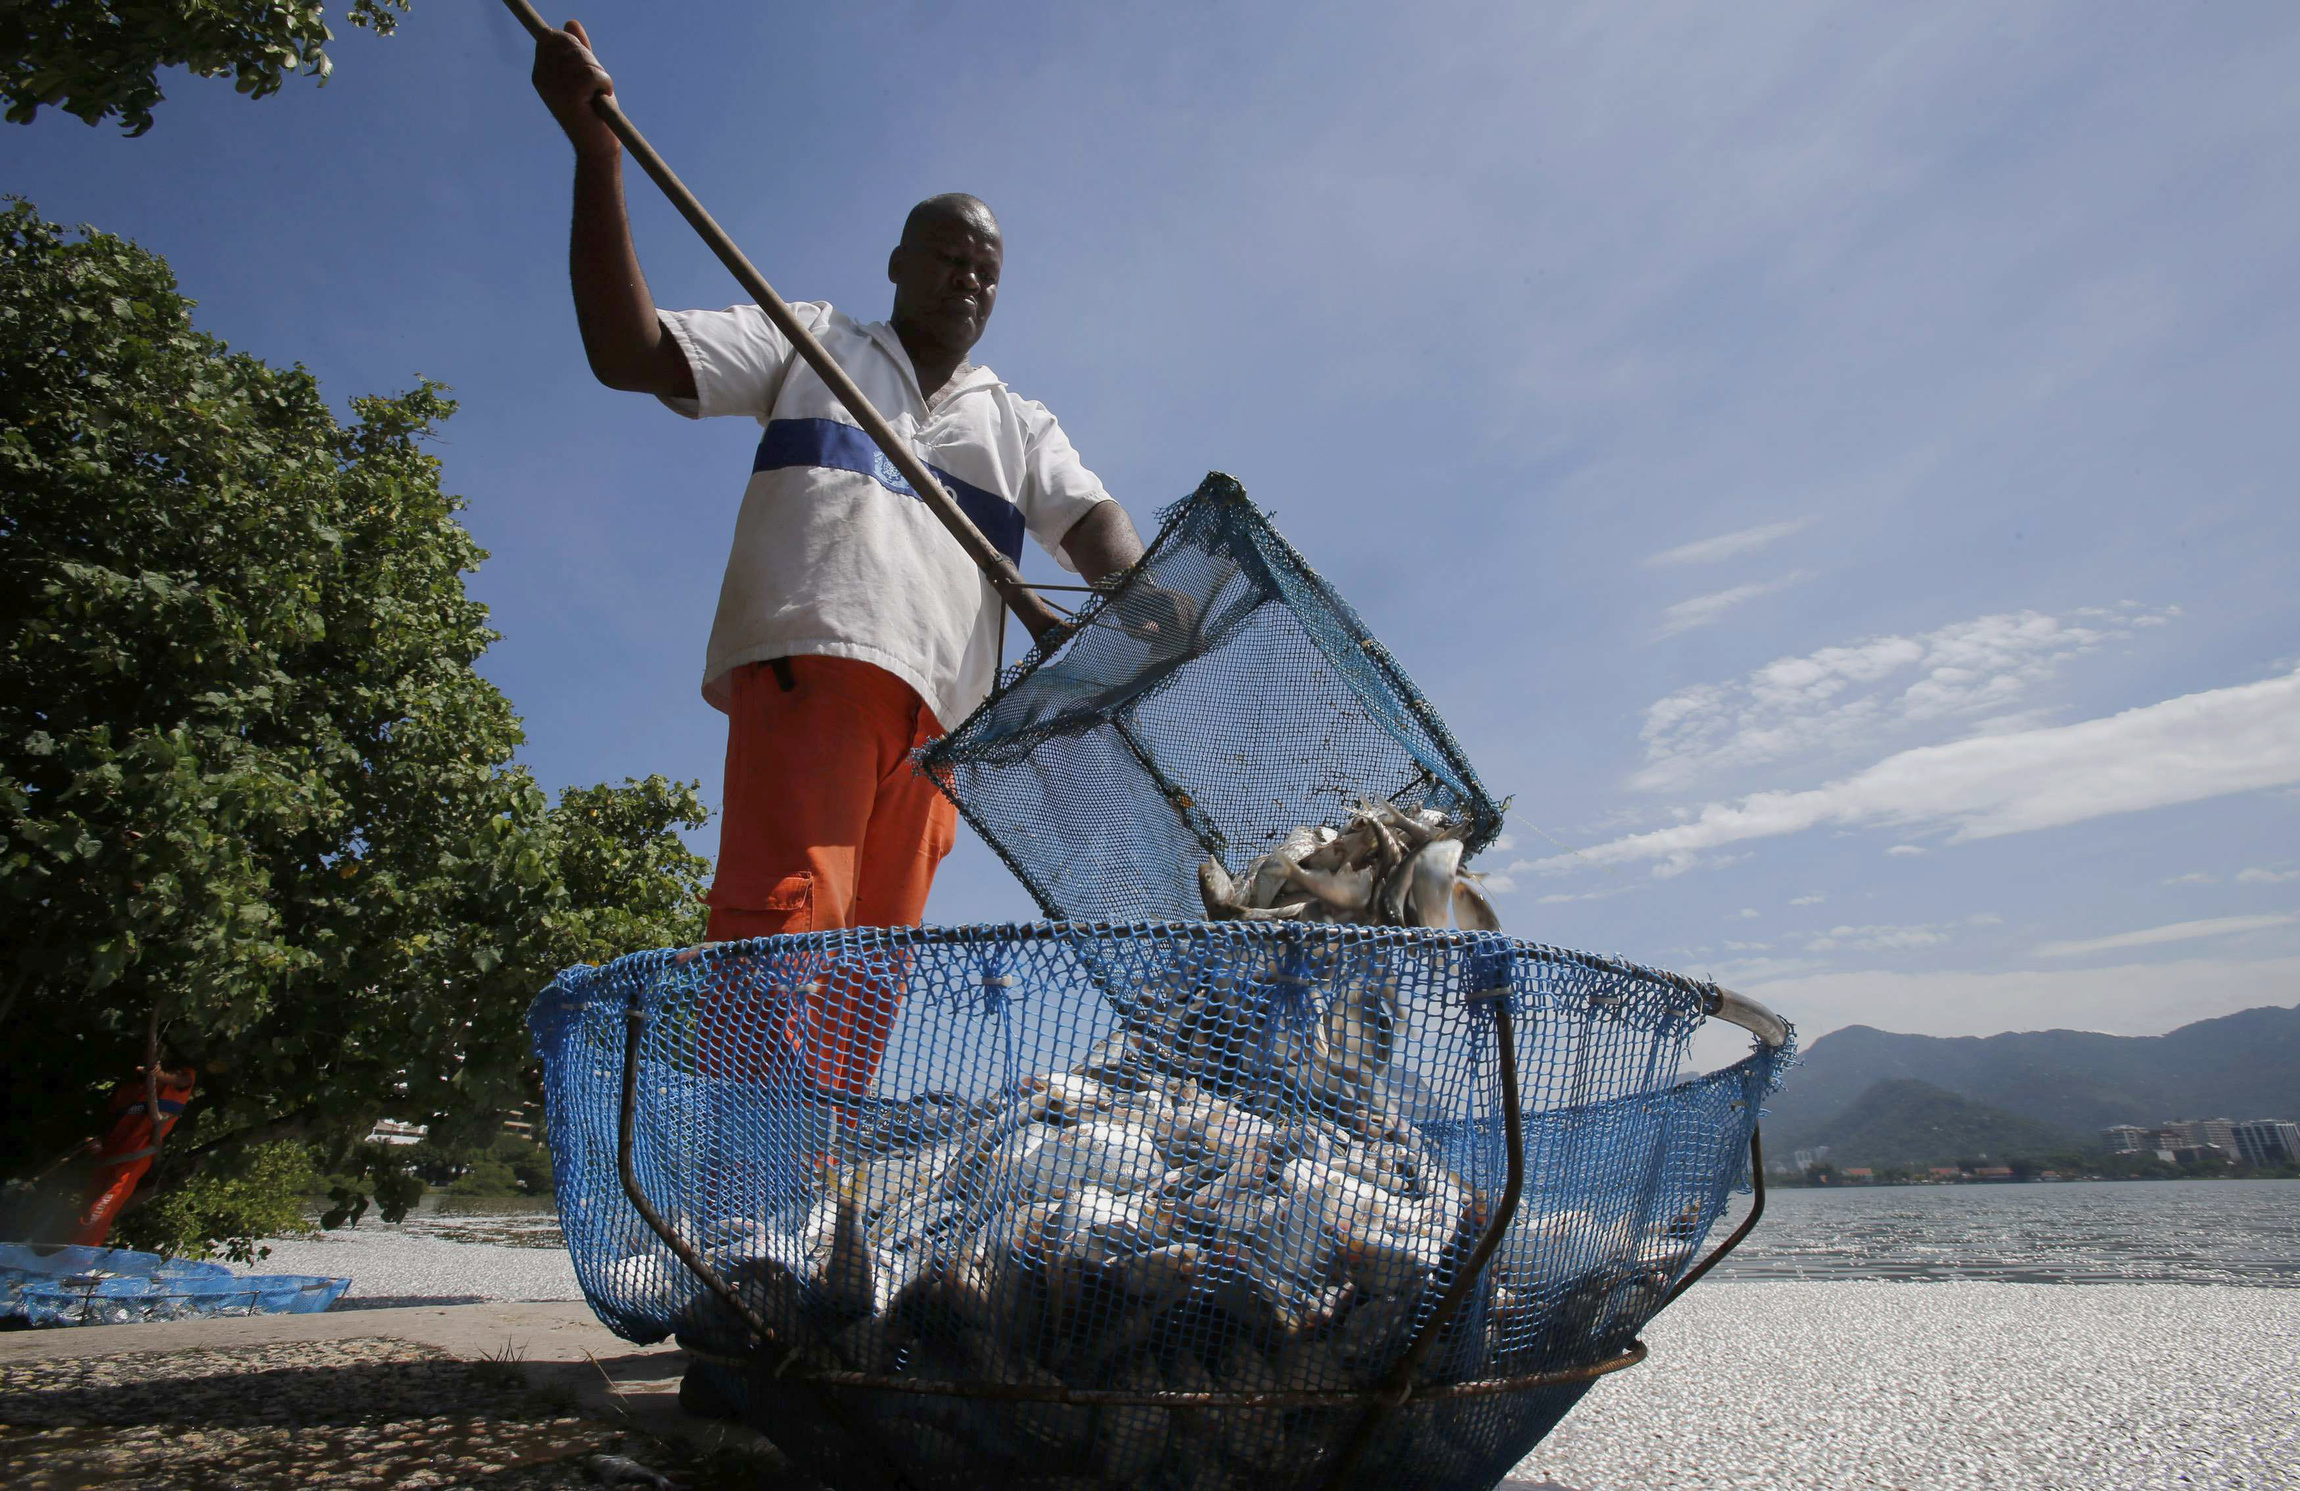 A municipal worker collects dead fish at the Rodrigo de Freitas lagoon in Rio de Janeiro March 13. When hundreds of thousands of young Catholics gather in Rio for World Youth Day with Pope Francis, reflections on safeguarding the environment will be part of the program. (CNS photo/Sergio Moraes, Reuters) 